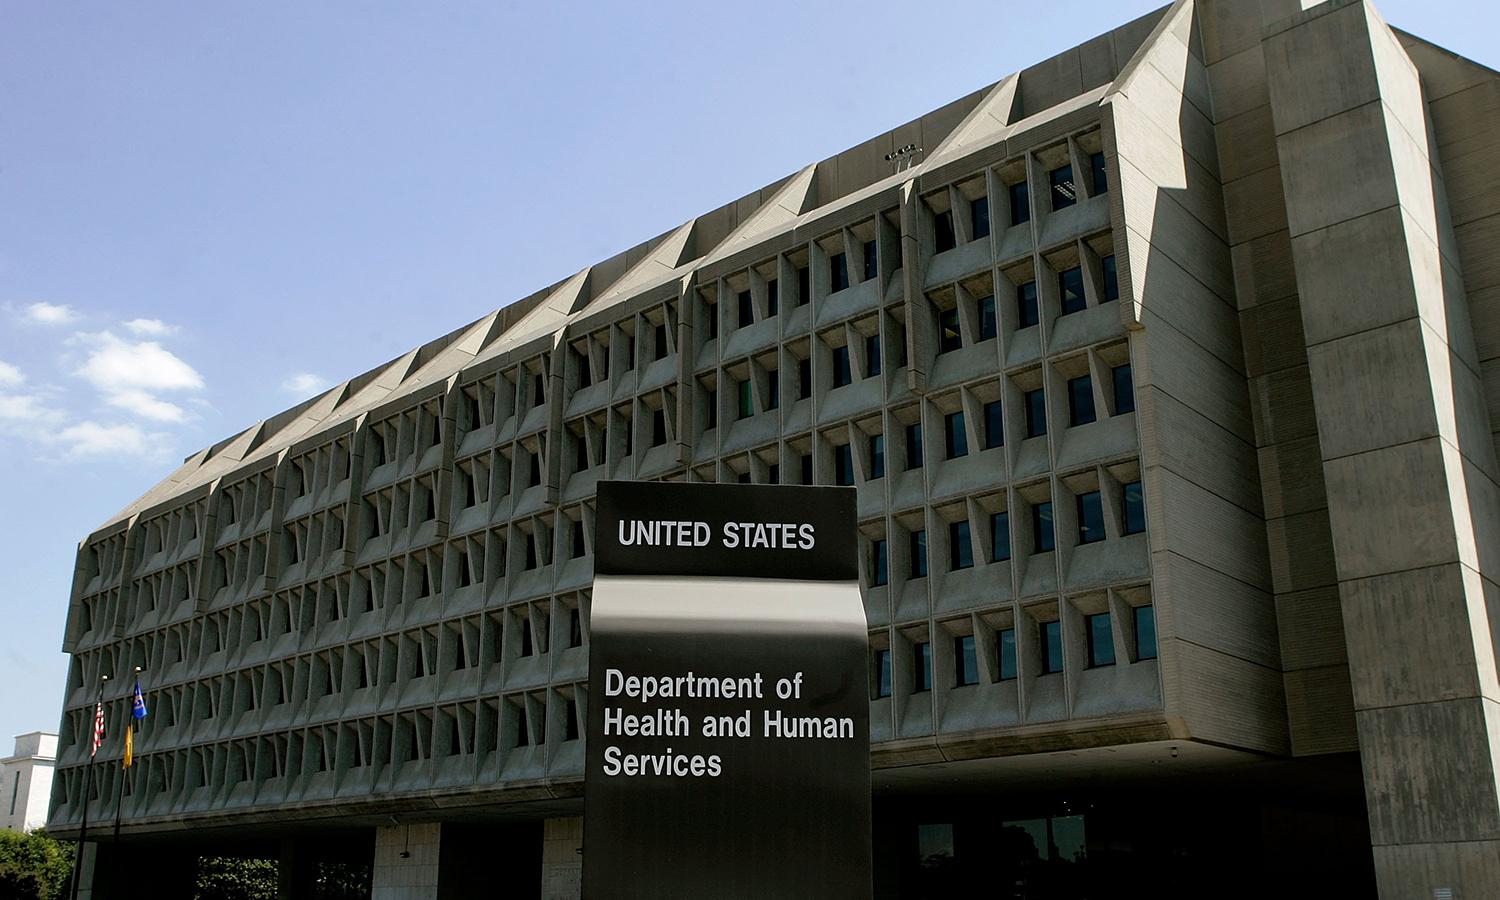 The U.S. Department of Health and Human Services building is shown in Washington.